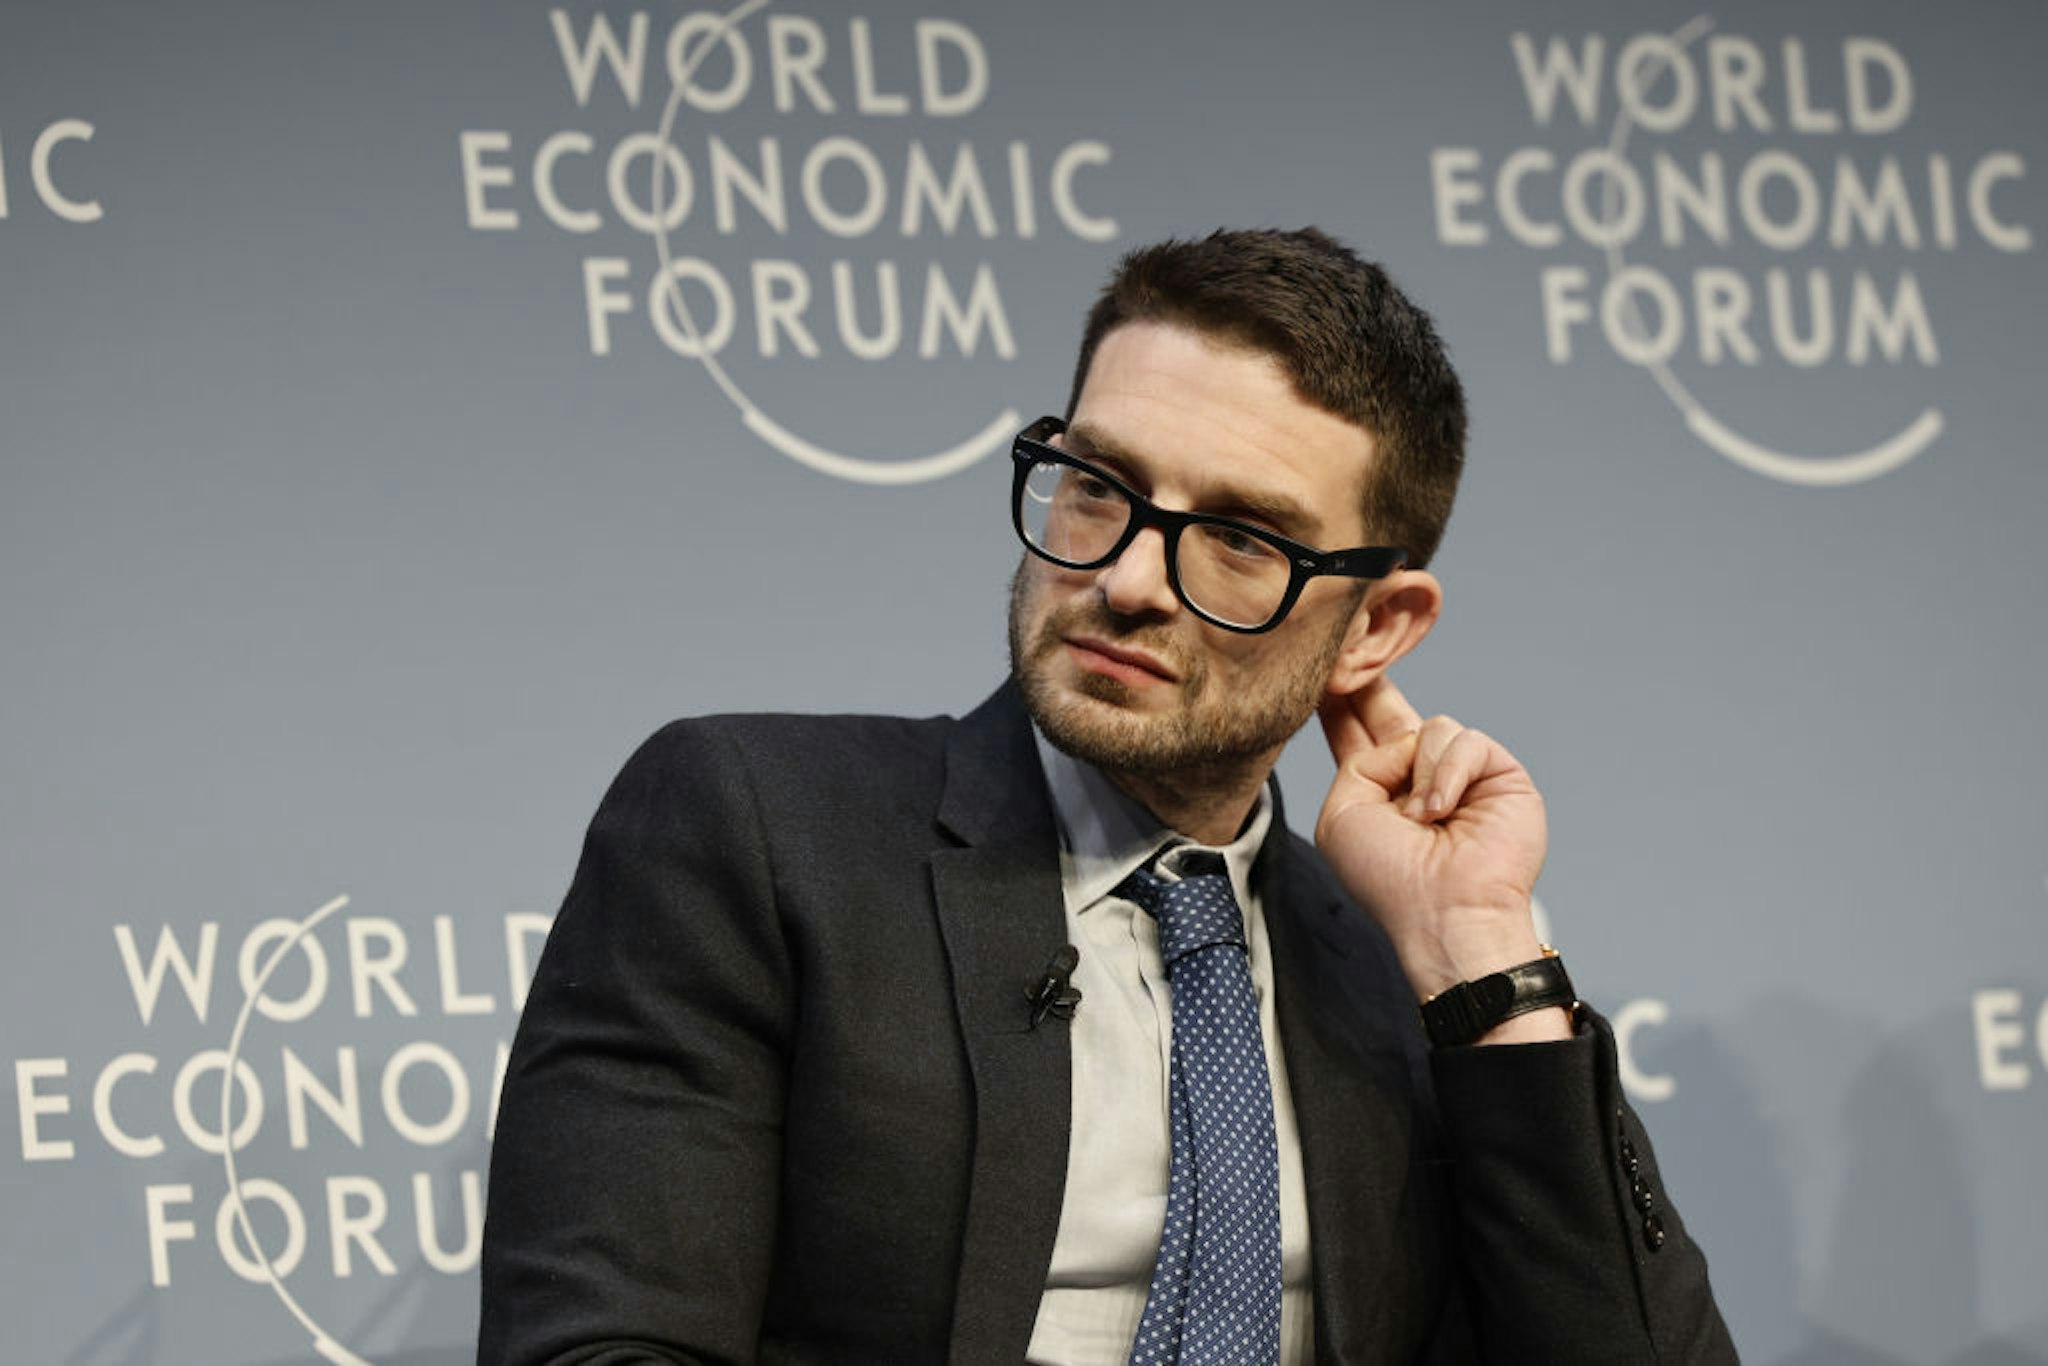 Alex Soros, chairman of Open Society Foundations, during a panel session on the closing day of the World Economic Forum (WEF) in Davos, Switzerland, on Friday, Jan. 19, 2024. The annual Davos gathering of political leaders, top executives and celebrities runs from January 15 to 19. Photographer: Stefan Wermuth/Bloomberg via Getty Images